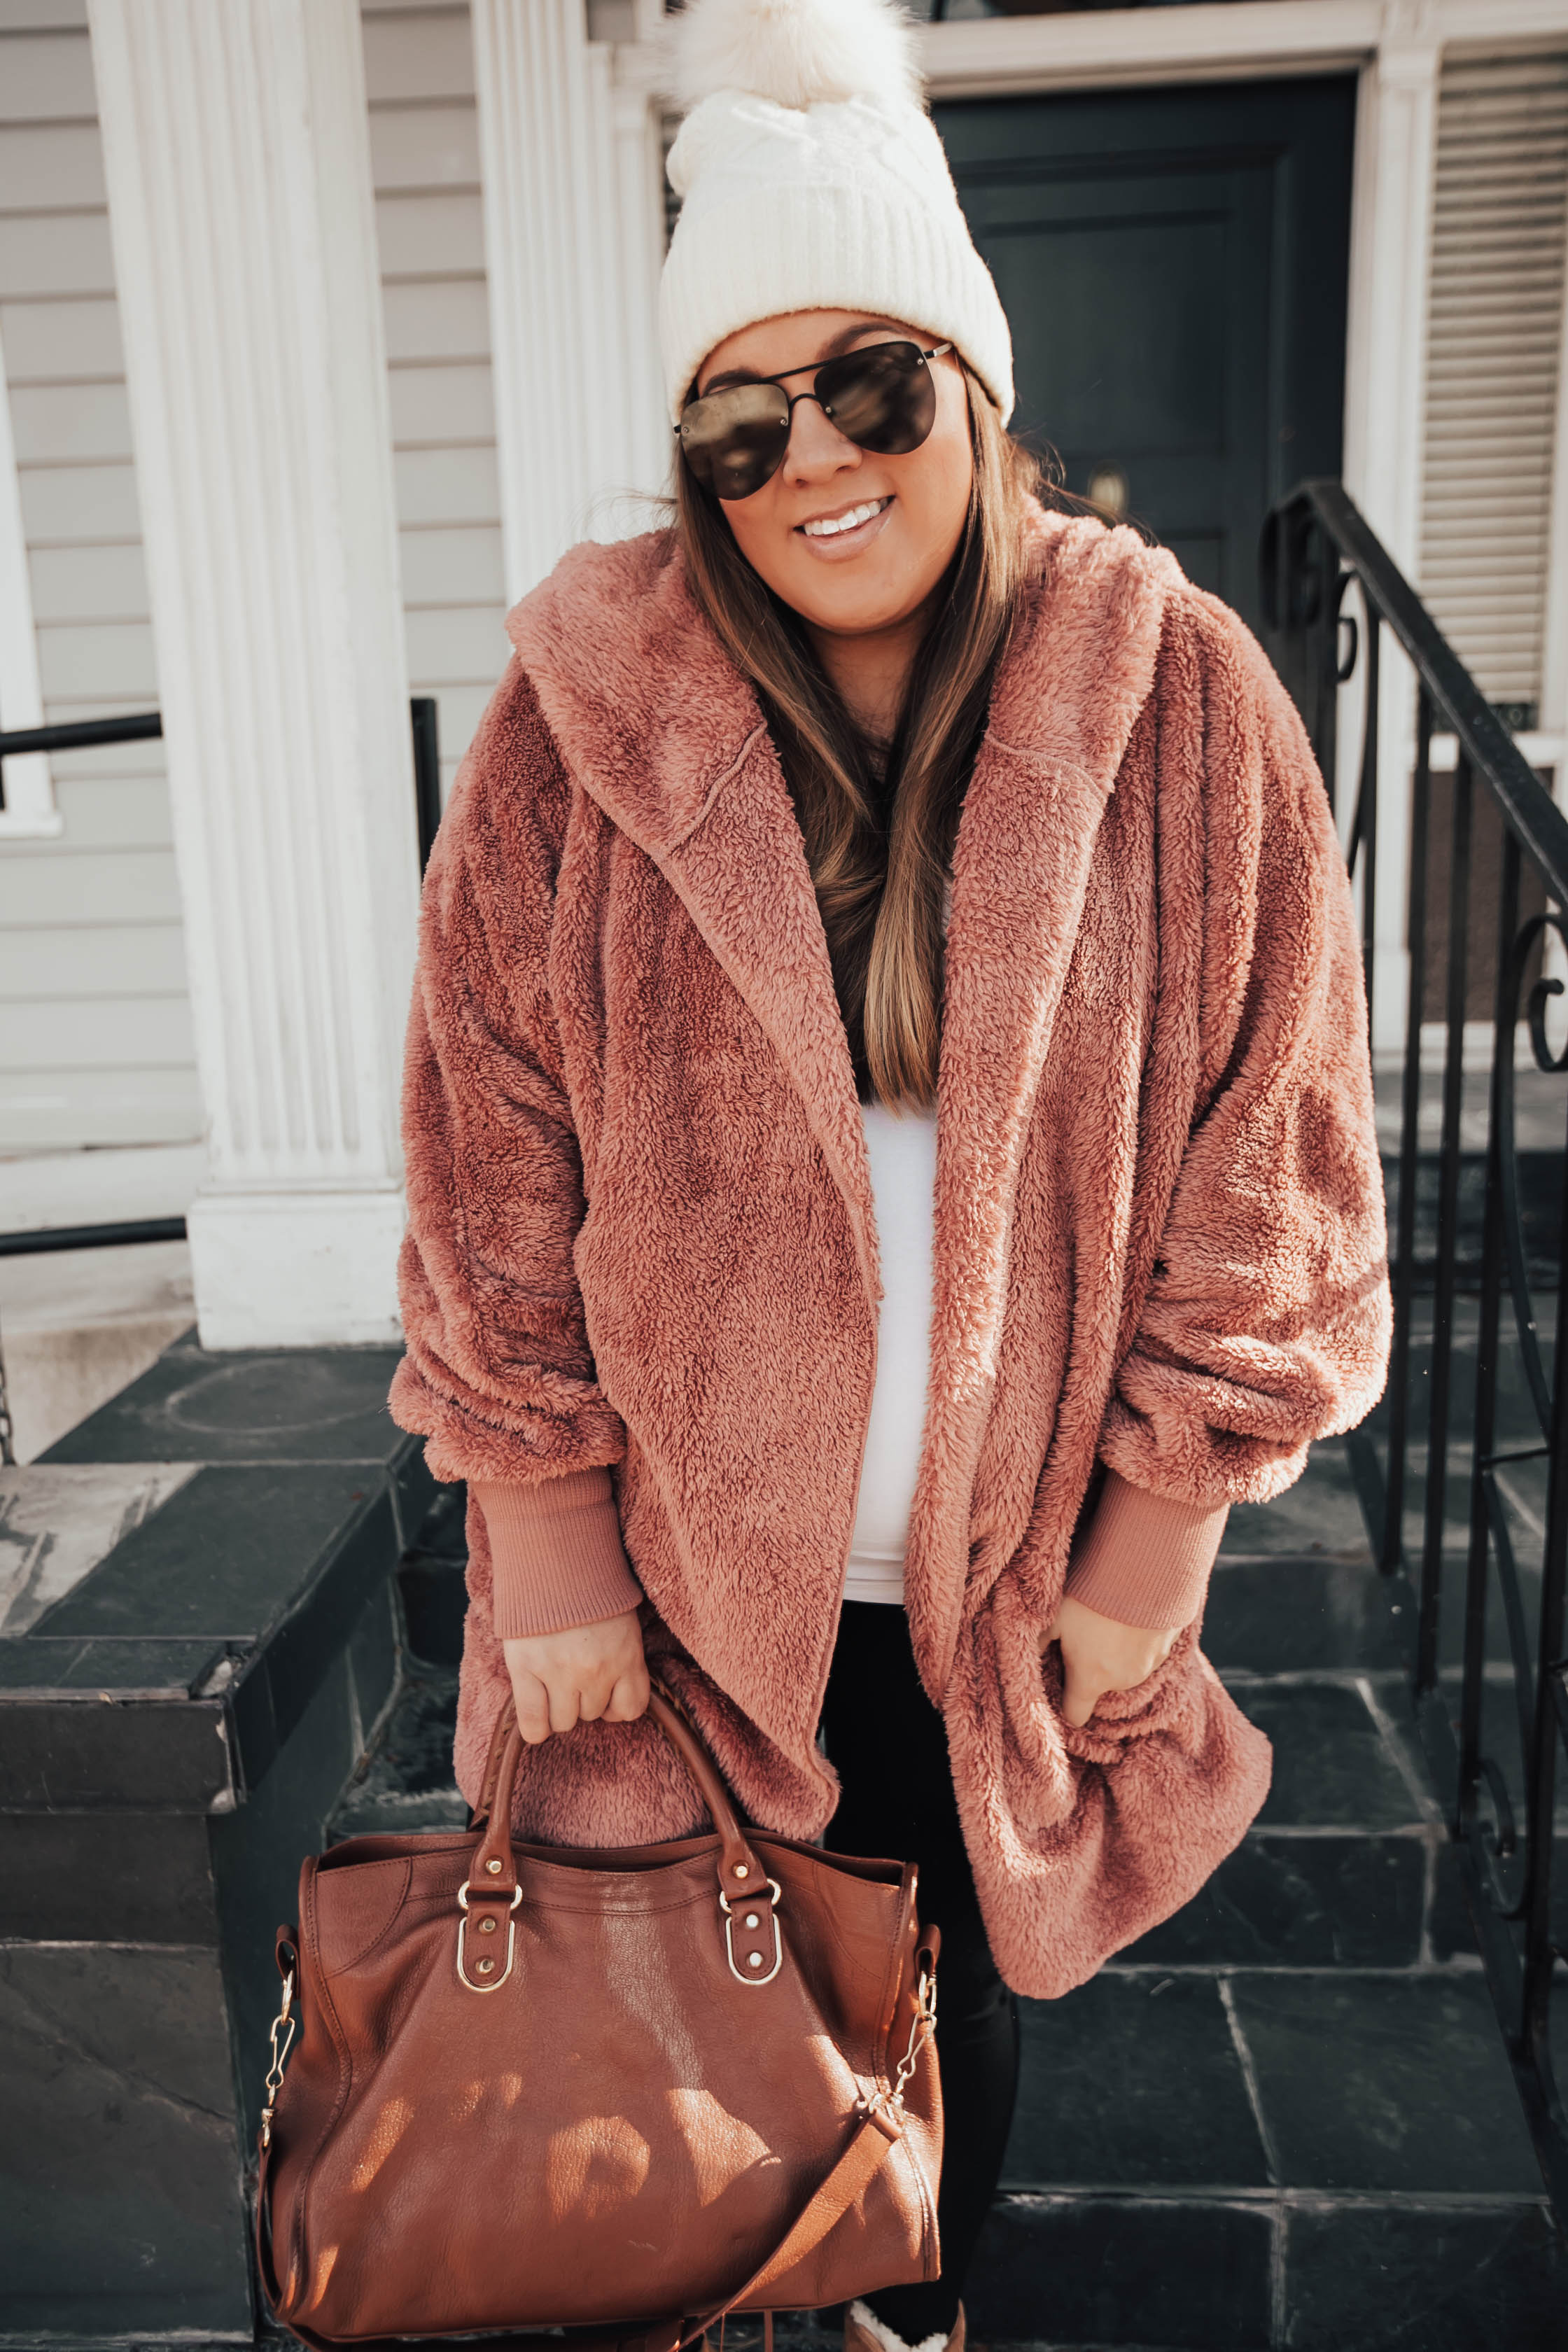 Reno blogger, Ashley Zeal, from Two Peas in a Prada shares her December Amazon favorites featuring all of the best products she ordered from Amazon this month (including this cozy fleece)!